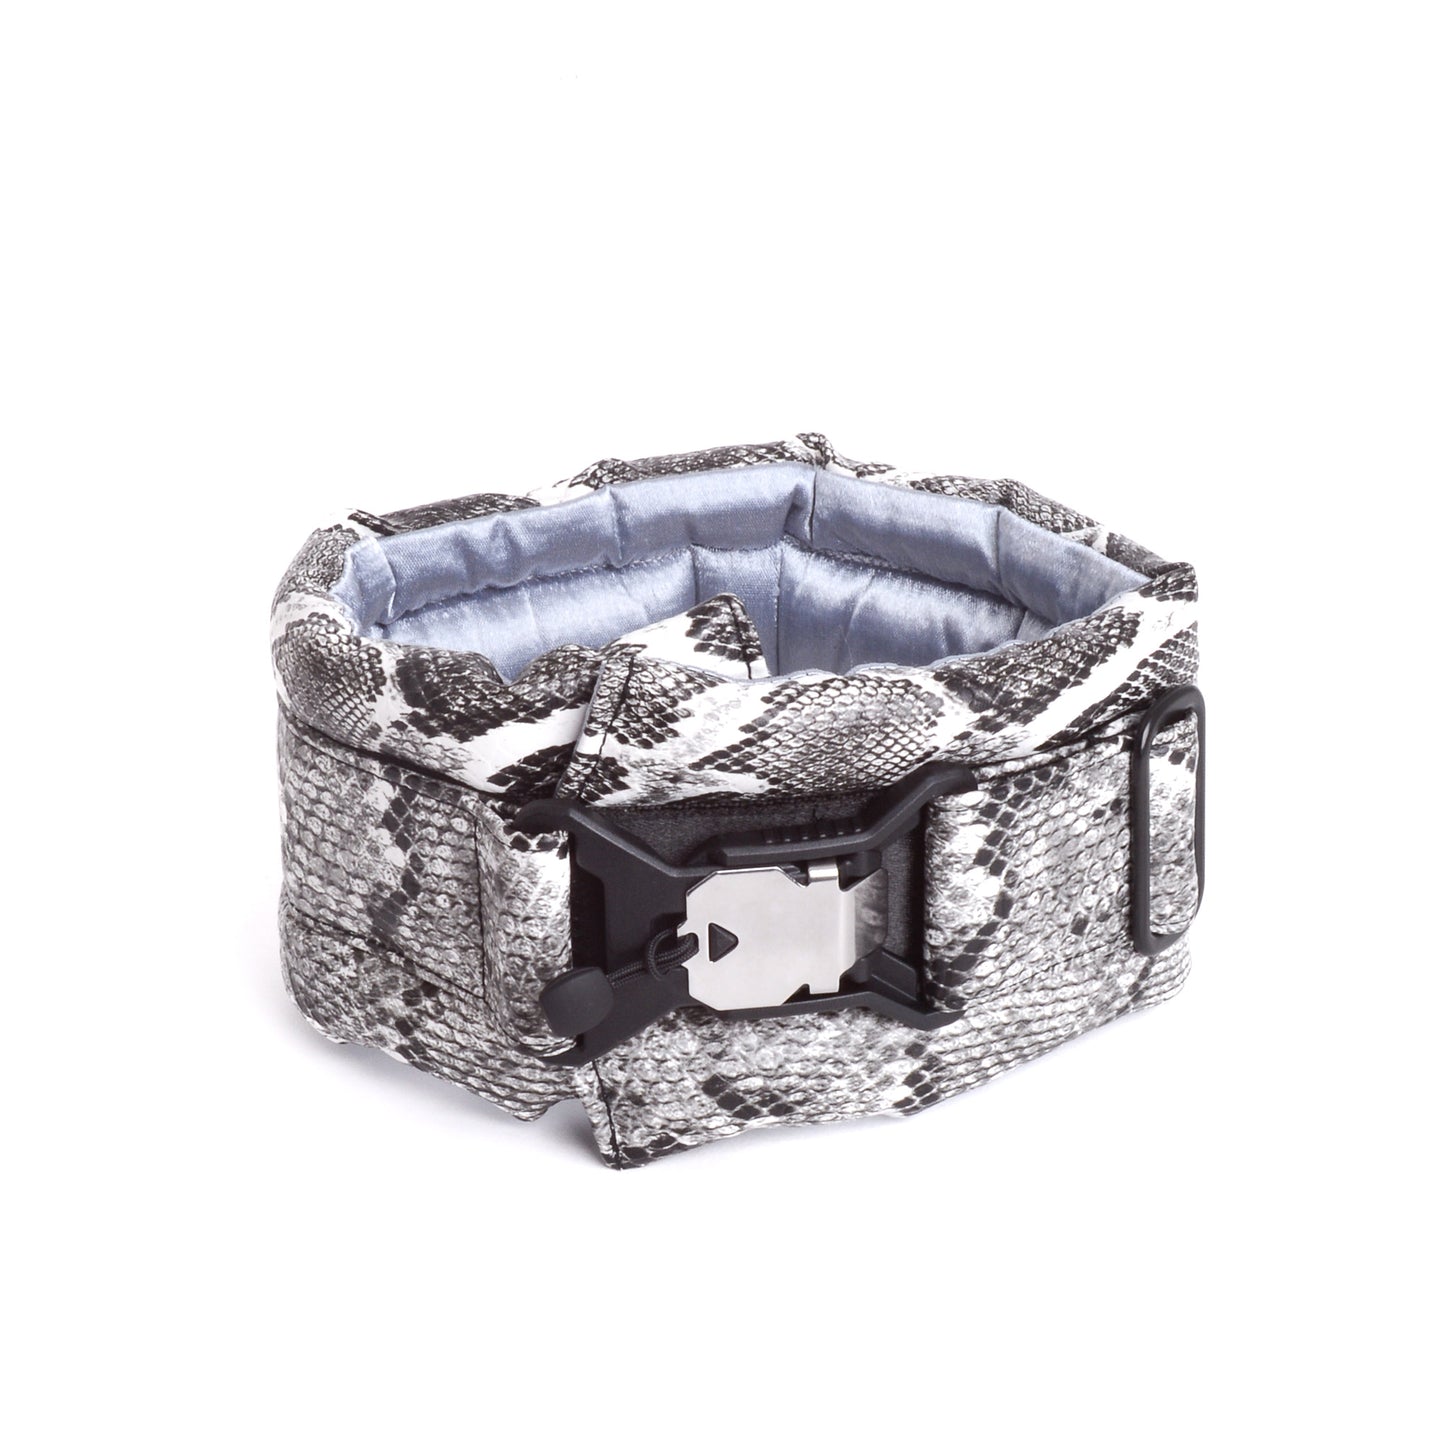 Standard Fluffy Magnetic Collar Eco Leather Serpent